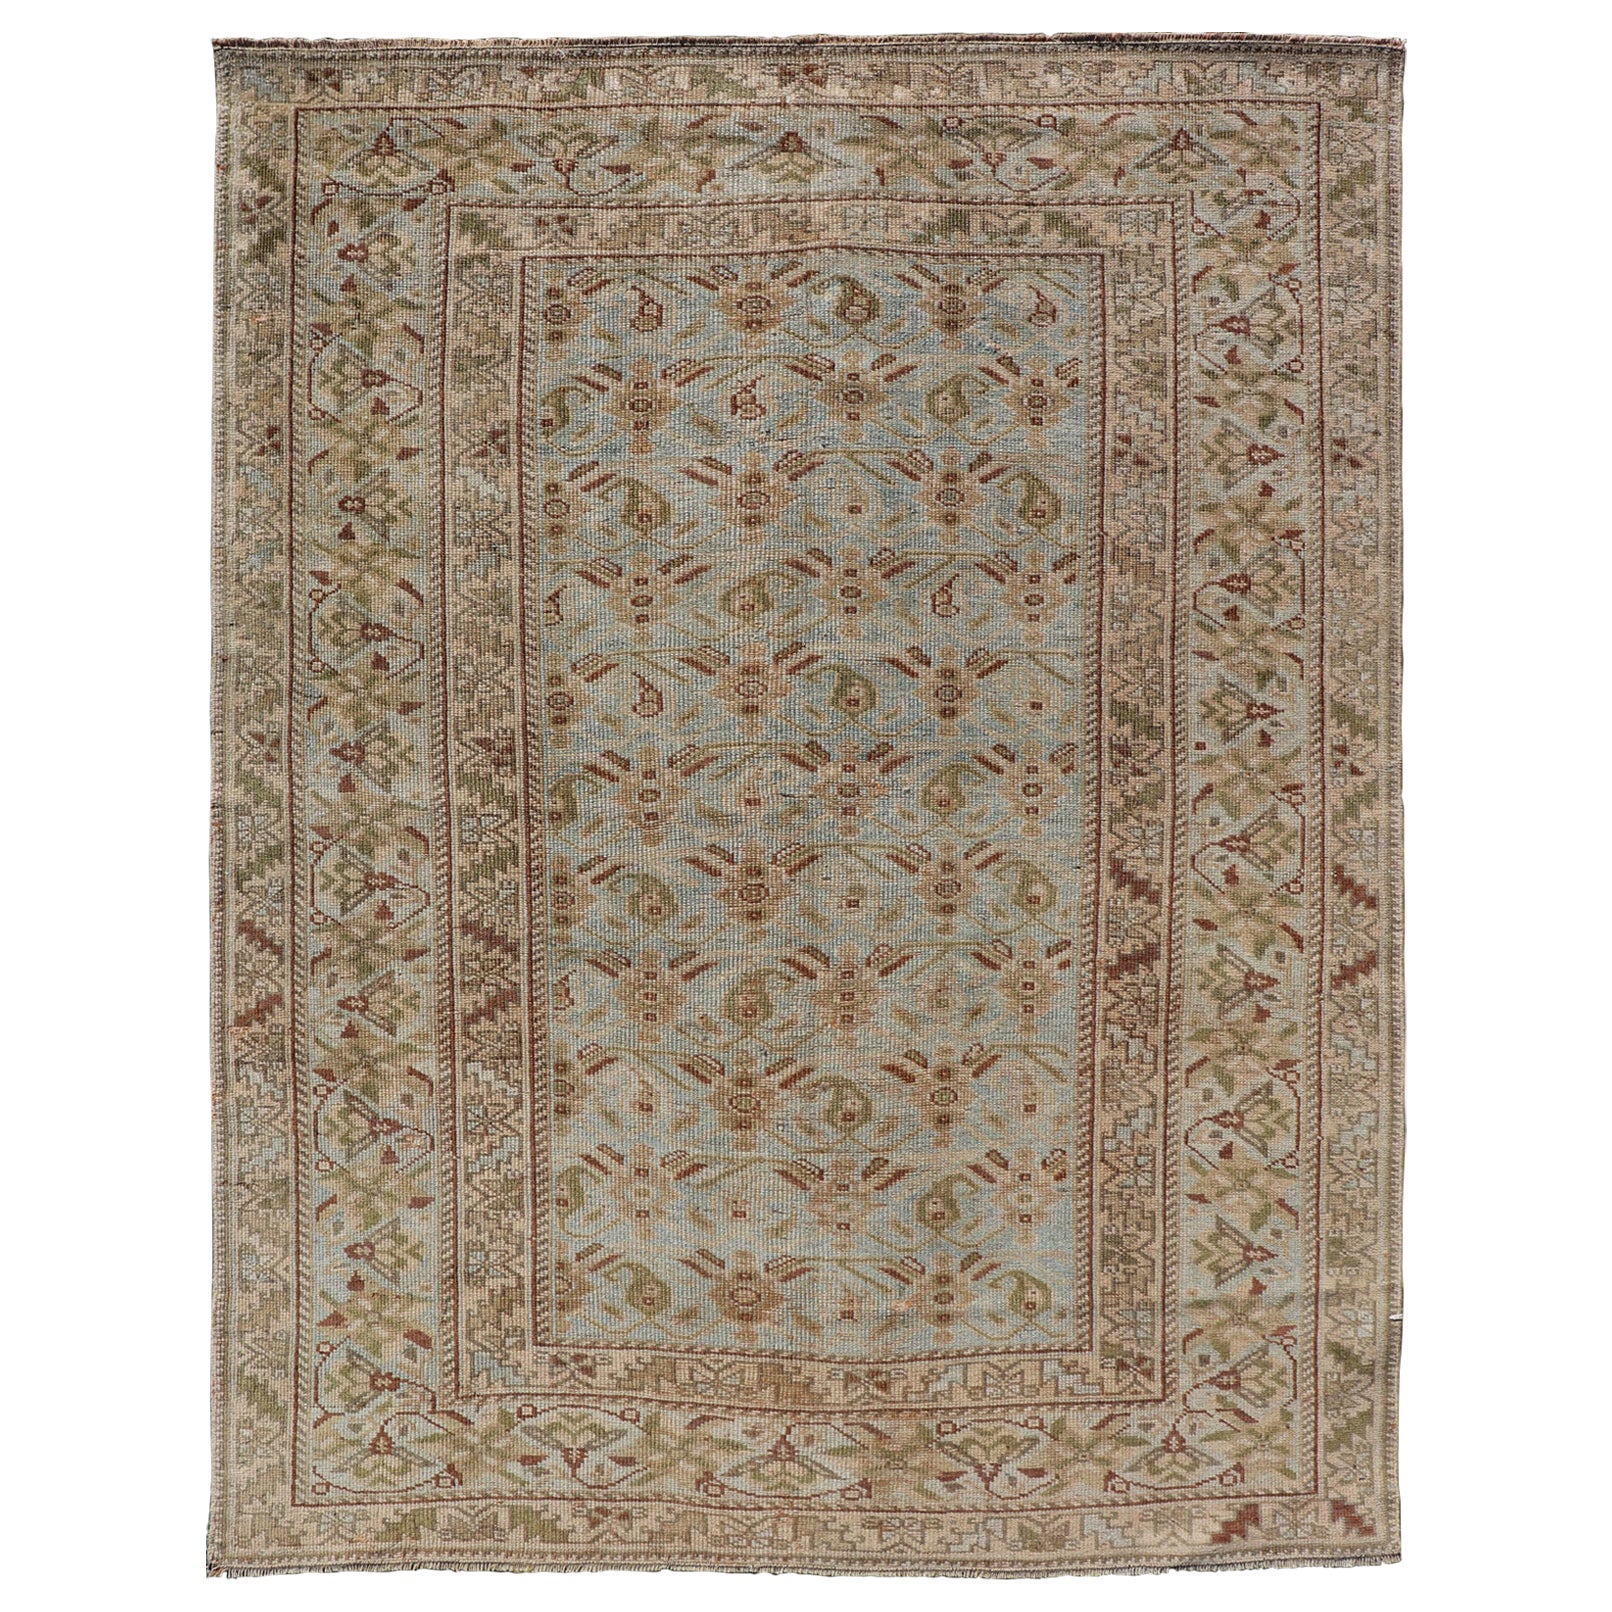  Fine Persian Antique Afshar Rug in Green, Browns, and Blue Tribal Carpet  For Sale